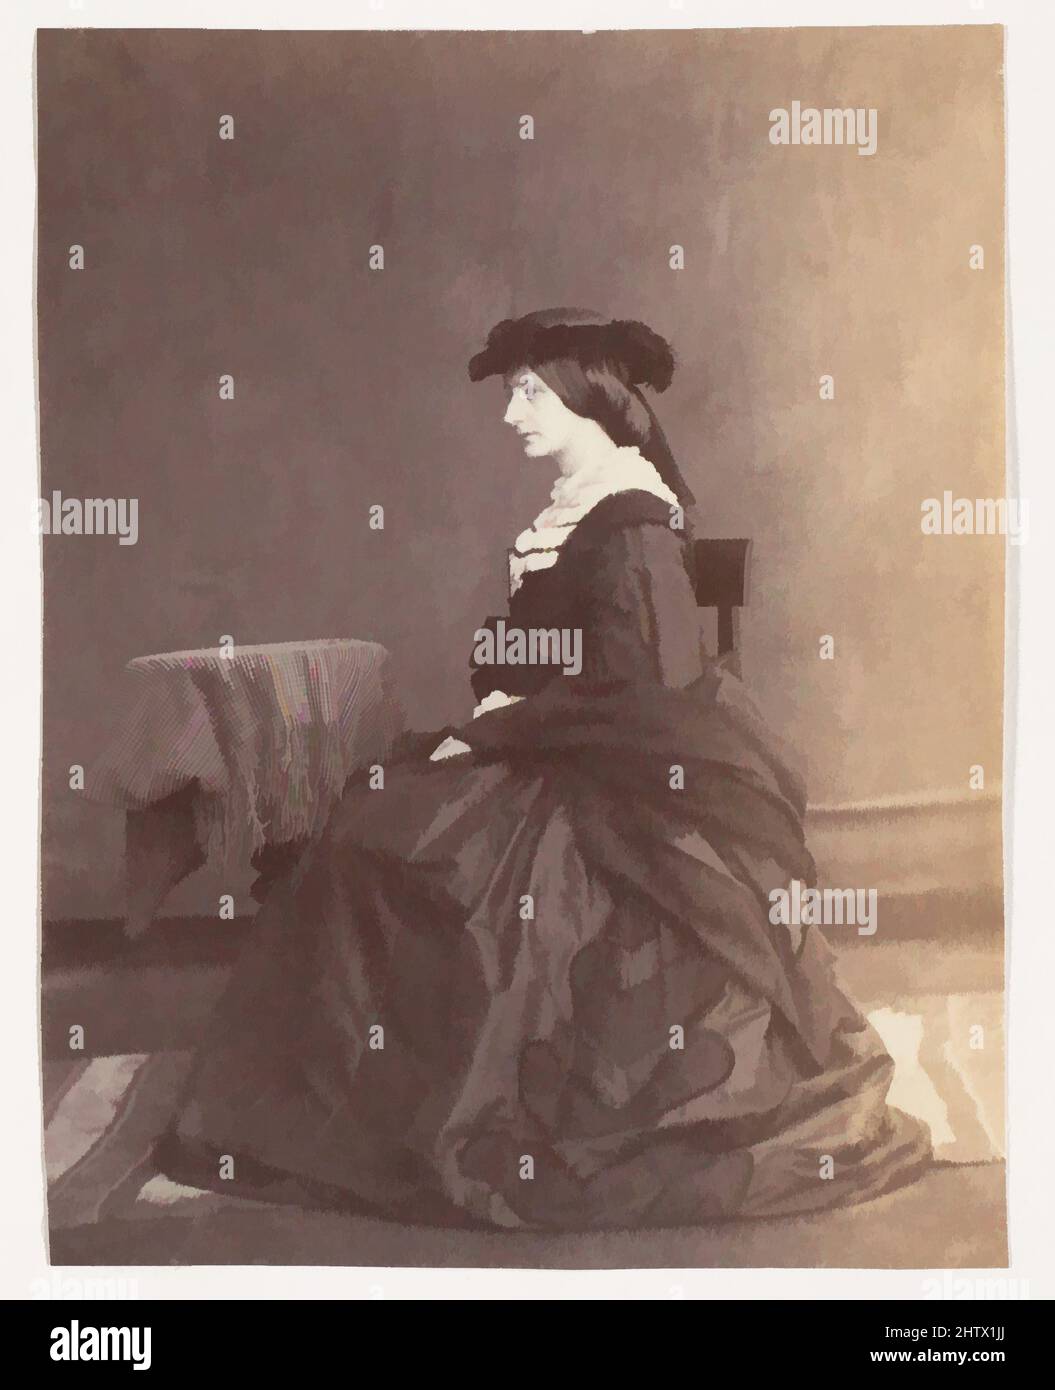 Art inspired by Lady Campbell, 1858–61, Albumen silver print, Image: 9.7 x 7.5 cm (3 13/16 x 2 15/16 in.), Photographs, Unknown, Classic works modernized by Artotop with a splash of modernity. Shapes, color and value, eye-catching visual impact on art. Emotions through freedom of artworks in a contemporary way. A timeless message pursuing a wildly creative new direction. Artists turning to the digital medium and creating the Artotop NFT Stock Photo